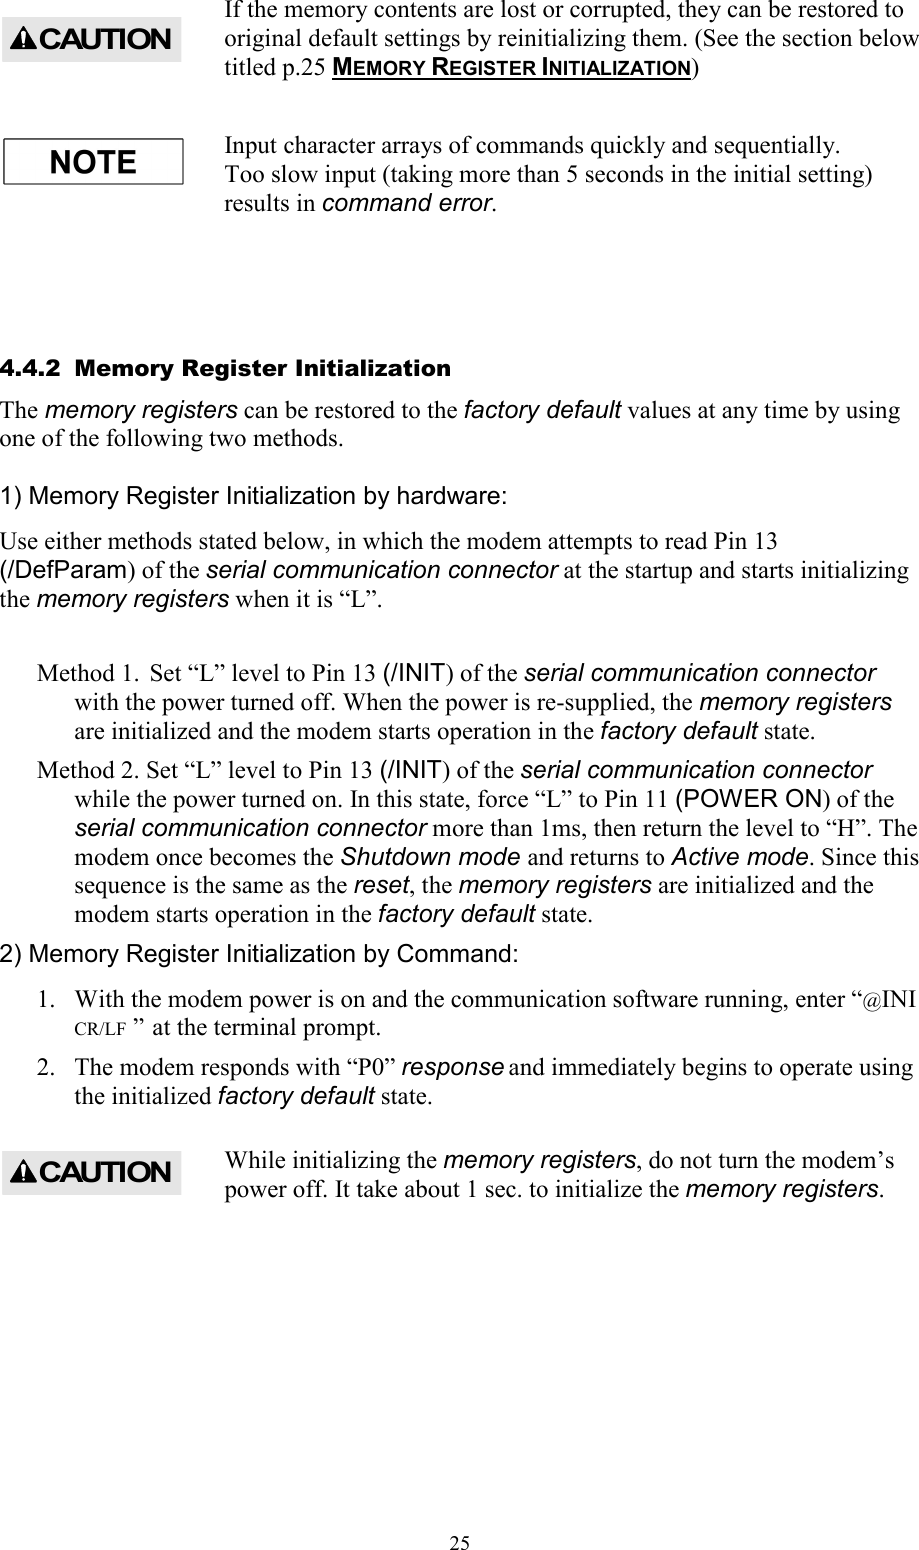  25If the memory contents are lost or corrupted, they can be restored to original default settings by reinitializing them. (See the section below titled p.25 MEMORY REGISTER INITIALIZATION) Input character arrays of commands quickly and sequentially. Too slow input (taking more than 5 seconds in the initial setting) results in command error.  4.4.2  Memory Register Initialization The memory registers can be restored to the factory default values at any time by using one of the following two methods.  1) Memory Register Initialization by hardware: Use either methods stated below, in which the modem attempts to read Pin 13 (/DefParam) of the serial communication connector at the startup and starts initializing the memory registers when it is “L”.  Method 1.  Set “L” level to Pin 13 (/INIT) of the serial communication connector  with the power turned off. When the power is re-supplied, the memory registers are initialized and the modem starts operation in the factory default state. Method 2. Set “L” level to Pin 13 (/INIT) of the serial communication connector while the power turned on. In this state, force “L” to Pin 11 (POWER ON) of the serial communication connector more than 1ms, then return the level to “H”. The modem once becomes the Shutdown mode and returns to Active mode. Since this sequence is the same as the reset, the memory registers are initialized and the modem starts operation in the factory default state. 2) Memory Register Initialization by Command: 1.  With the modem power is on and the communication software running, enter “@INI CR/LF  ”  at the terminal prompt. 2.  The modem responds with “P0” response and immediately begins to operate using the initialized factory default state. While initializing the memory registers, do not turn the modem’s power off. It take about 1 sec. to initialize the memory registers.  CAUTIONCAUTION